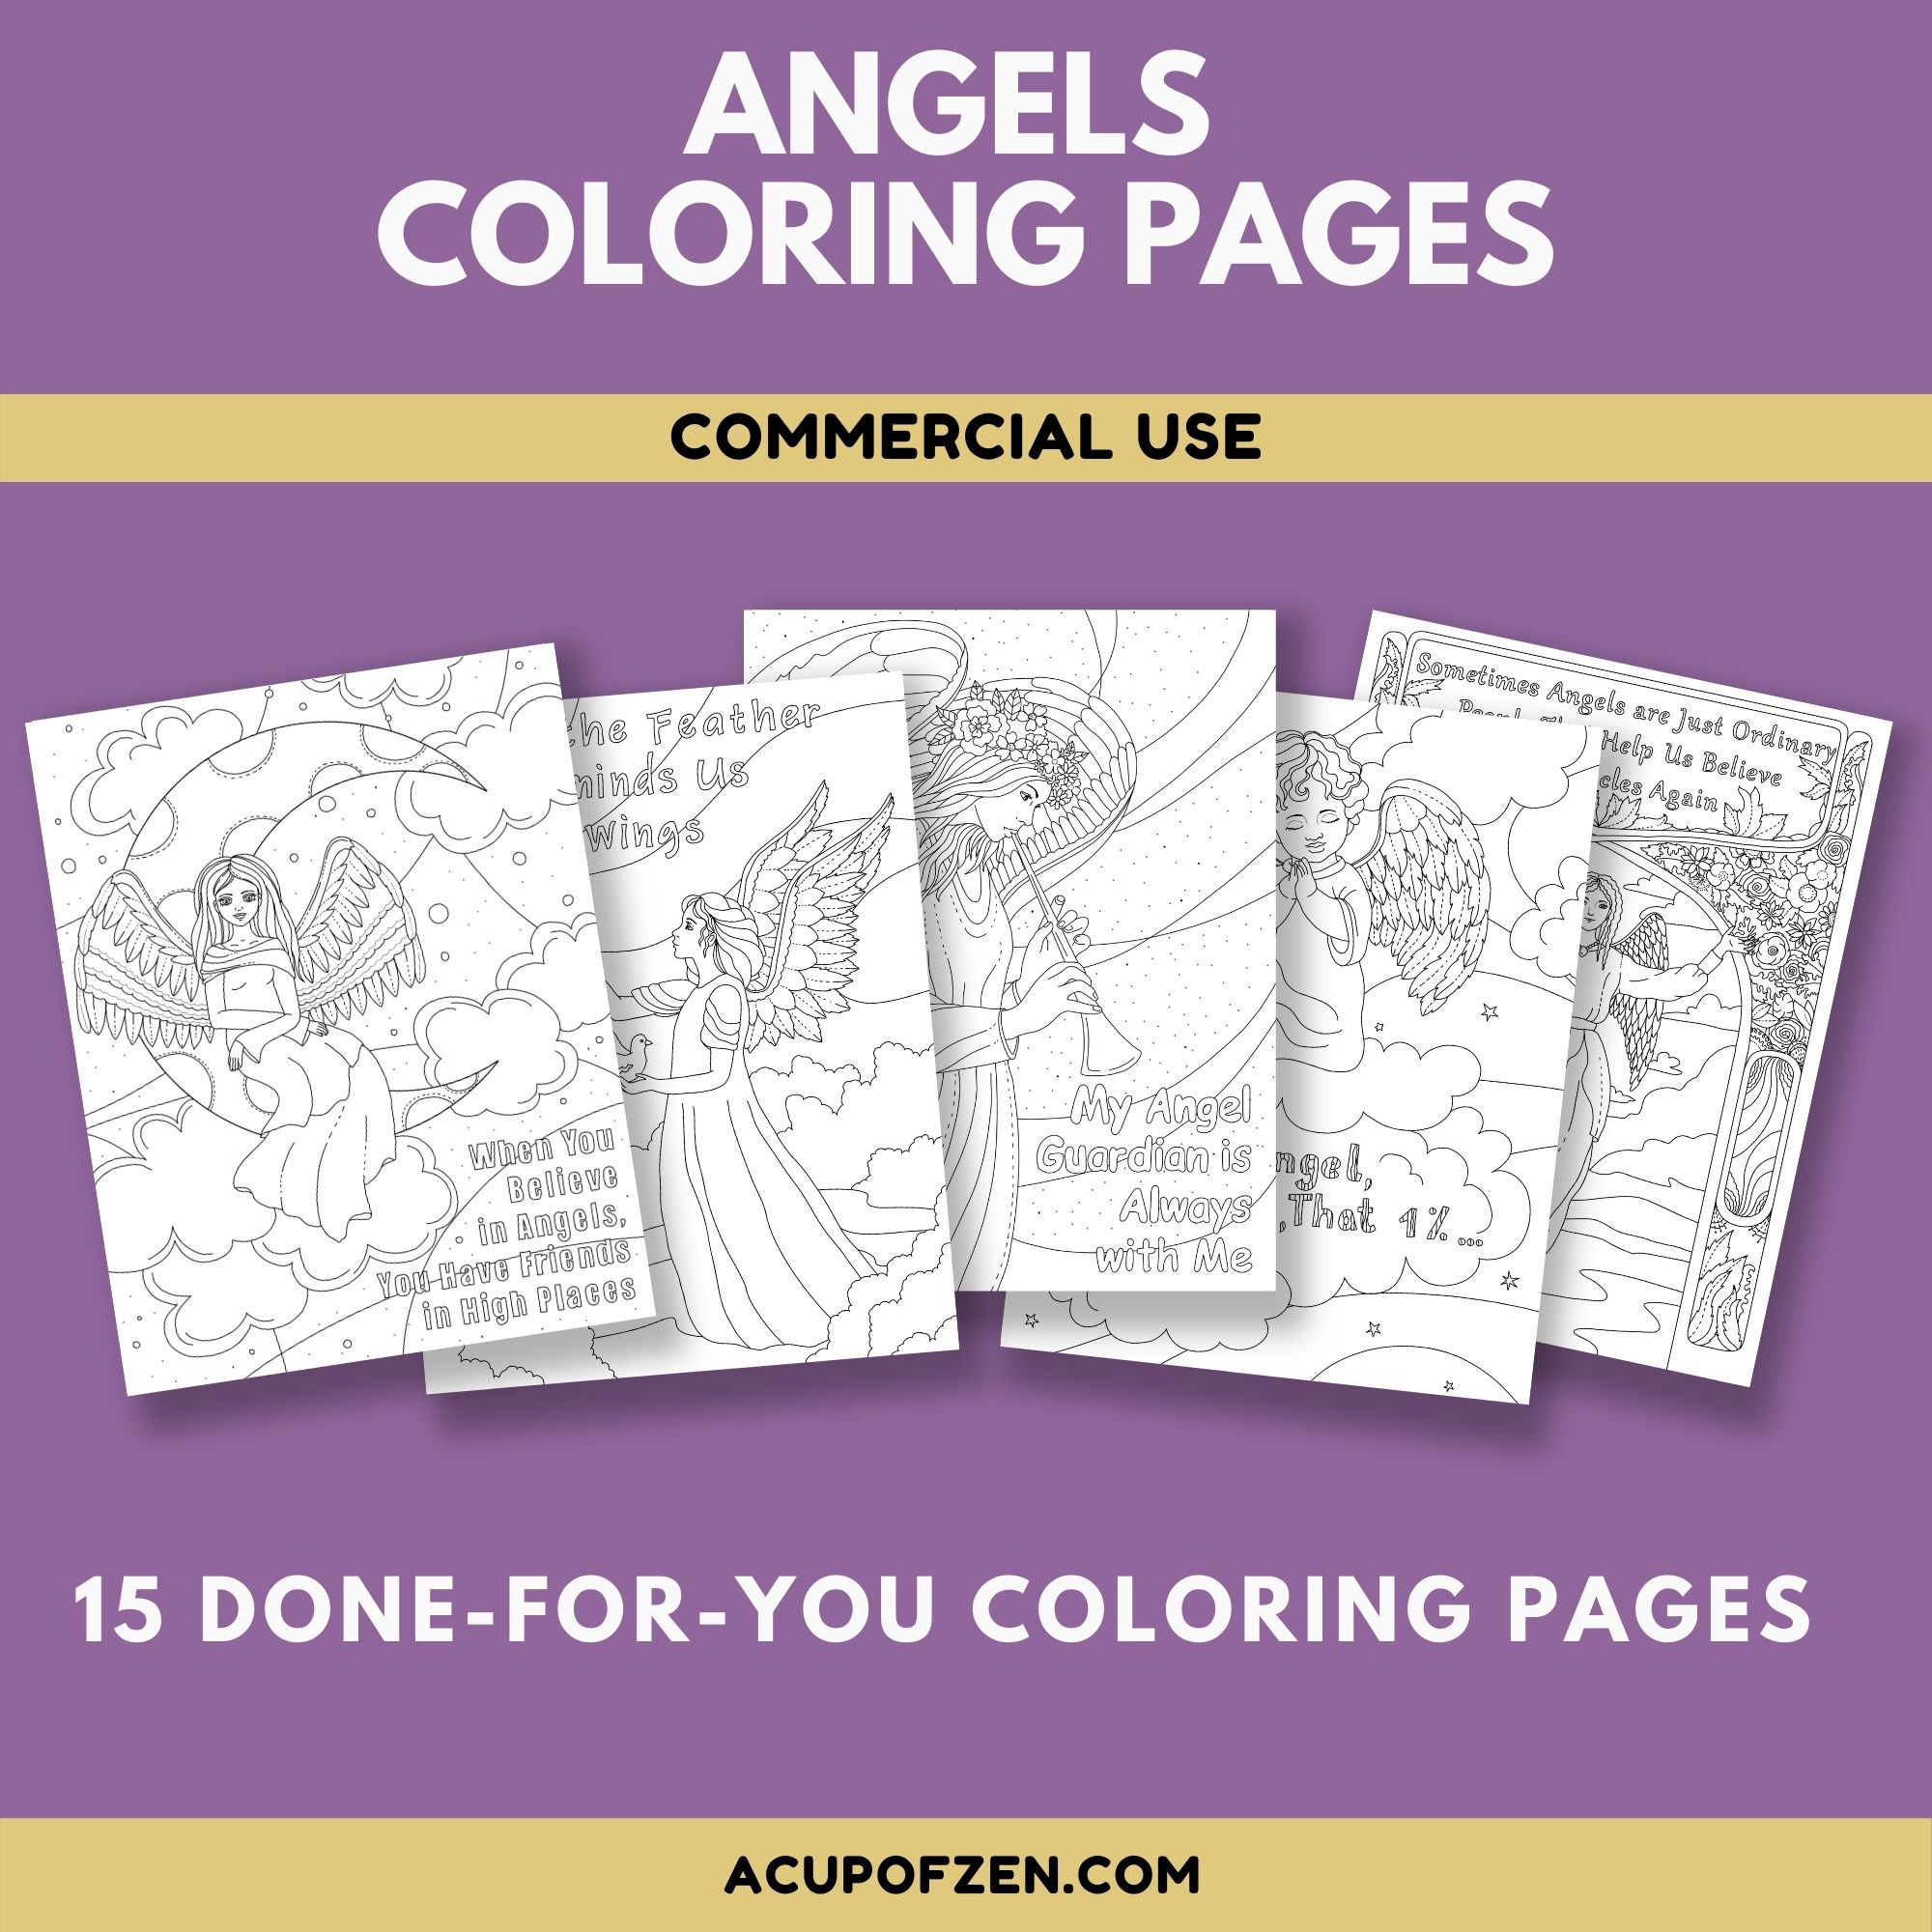 Angels Coloring Pages - Commercial Use